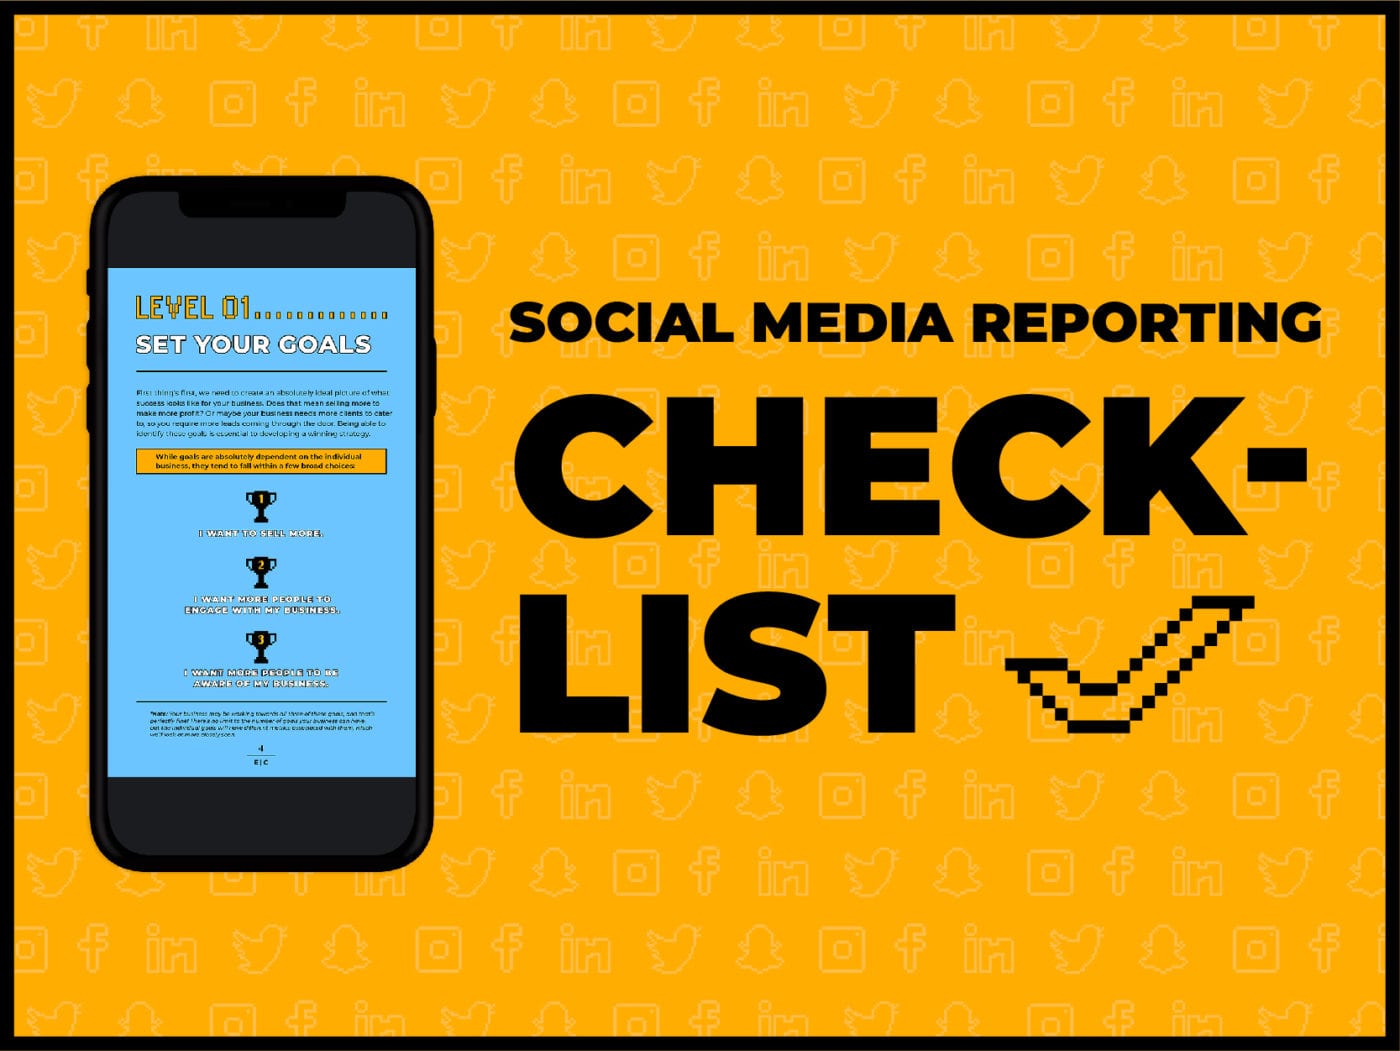 Socail Media Reporting Checklist Resource Page Image